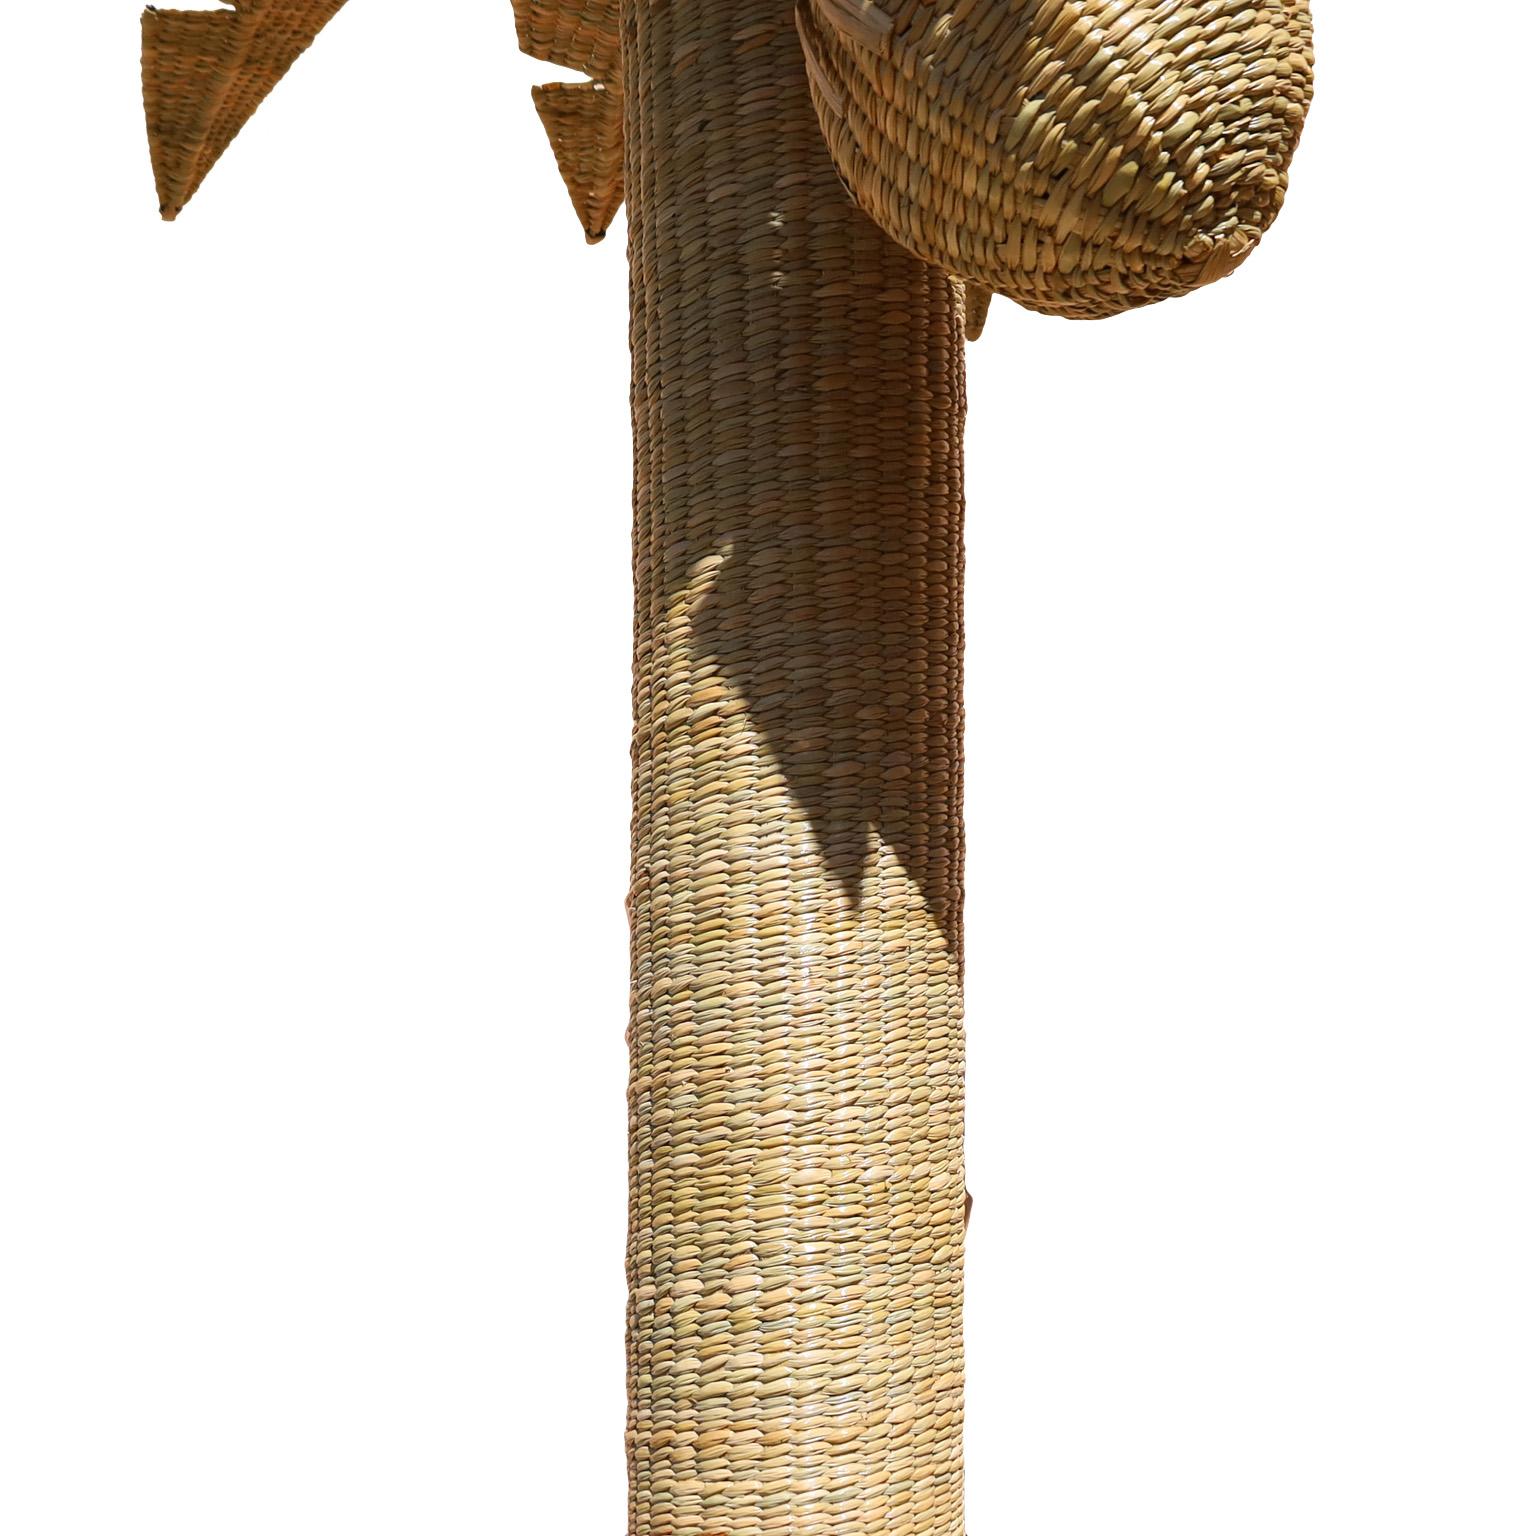 Life Size Wicker Palm Tree Sculpture from the FS Flores Collection For Sale 6